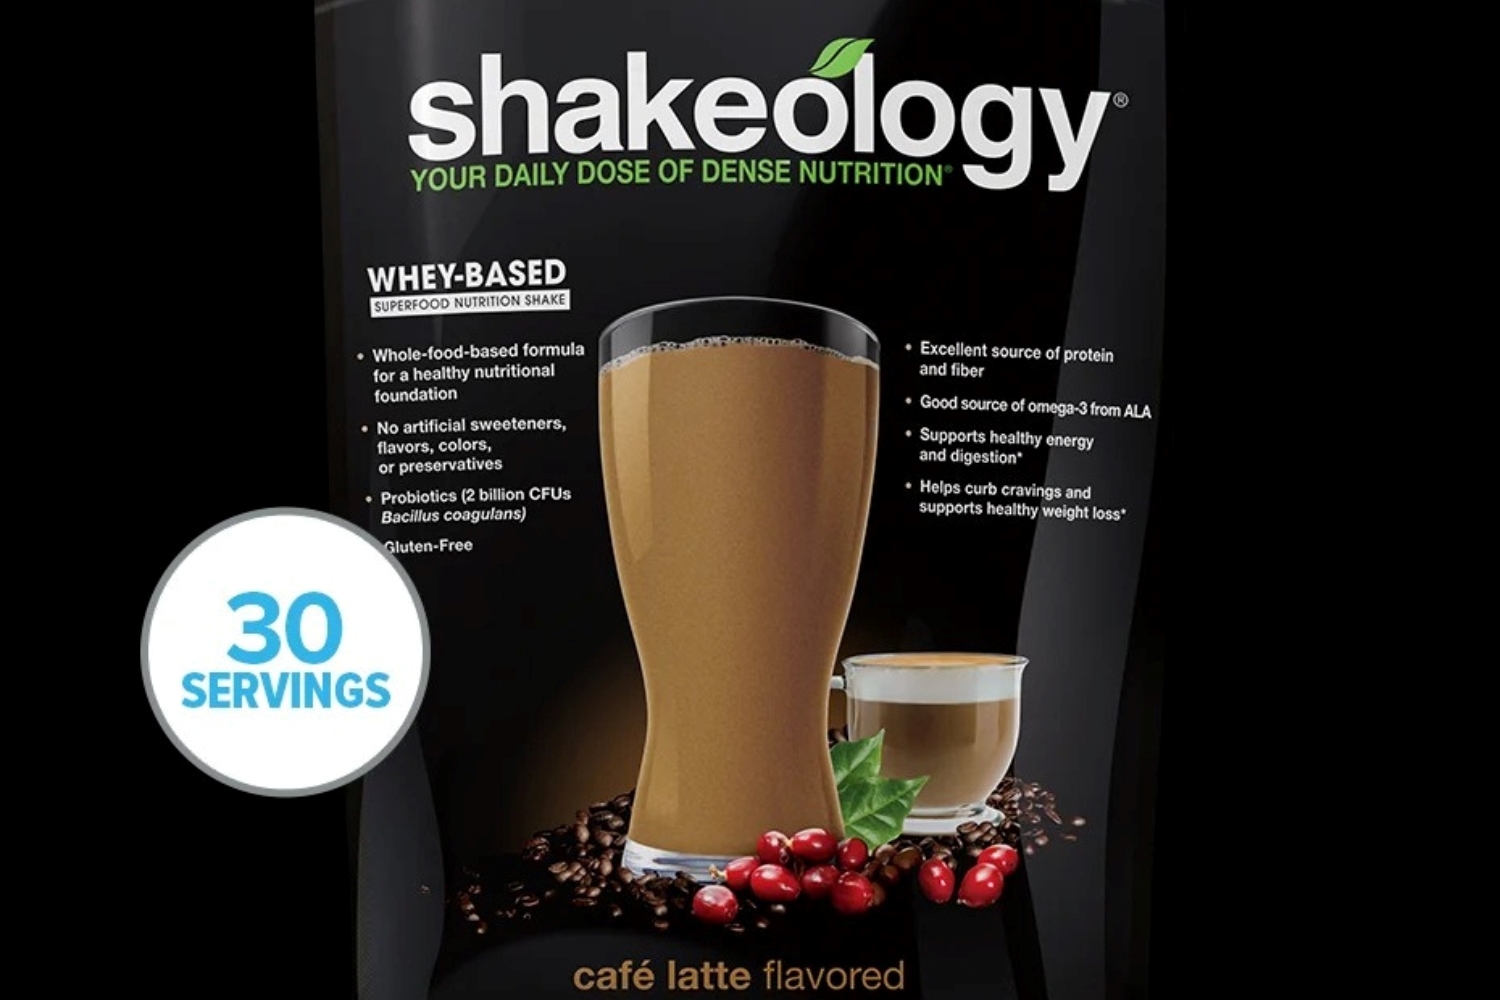 18-shakeology-cafe-latte-nutrition-facts